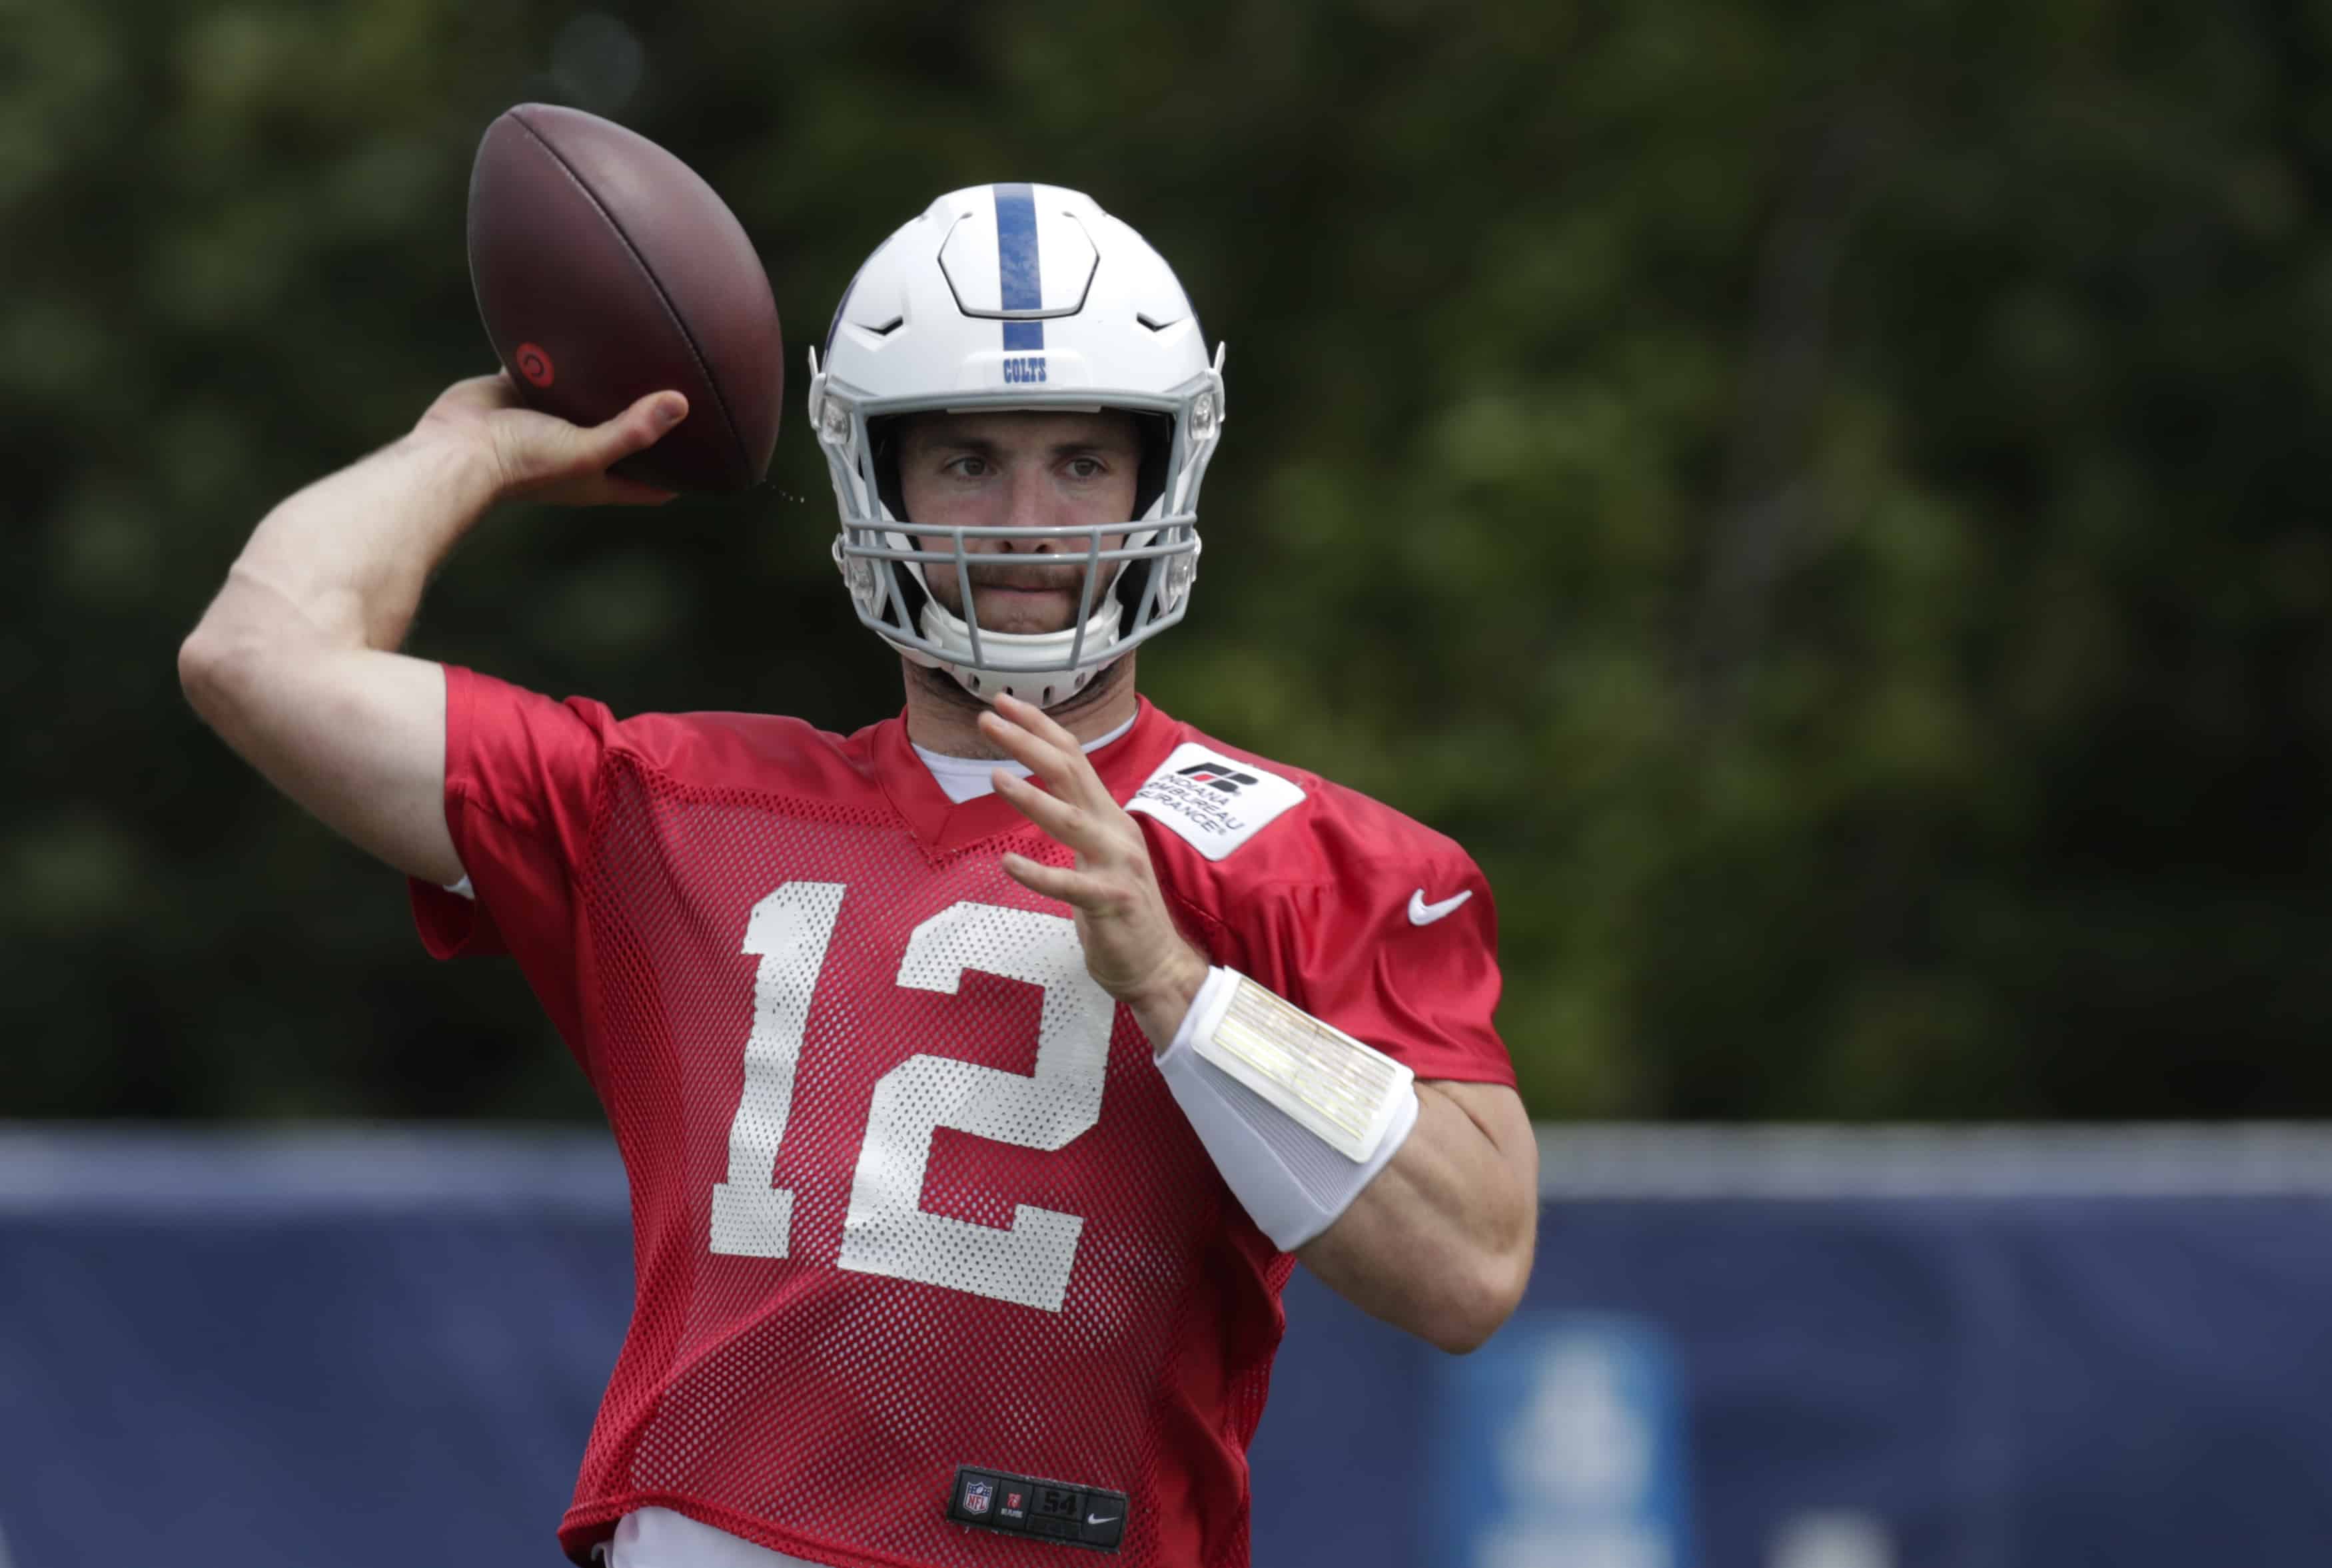 Luck felt sore, tired but pain-free after throwing at camp ...